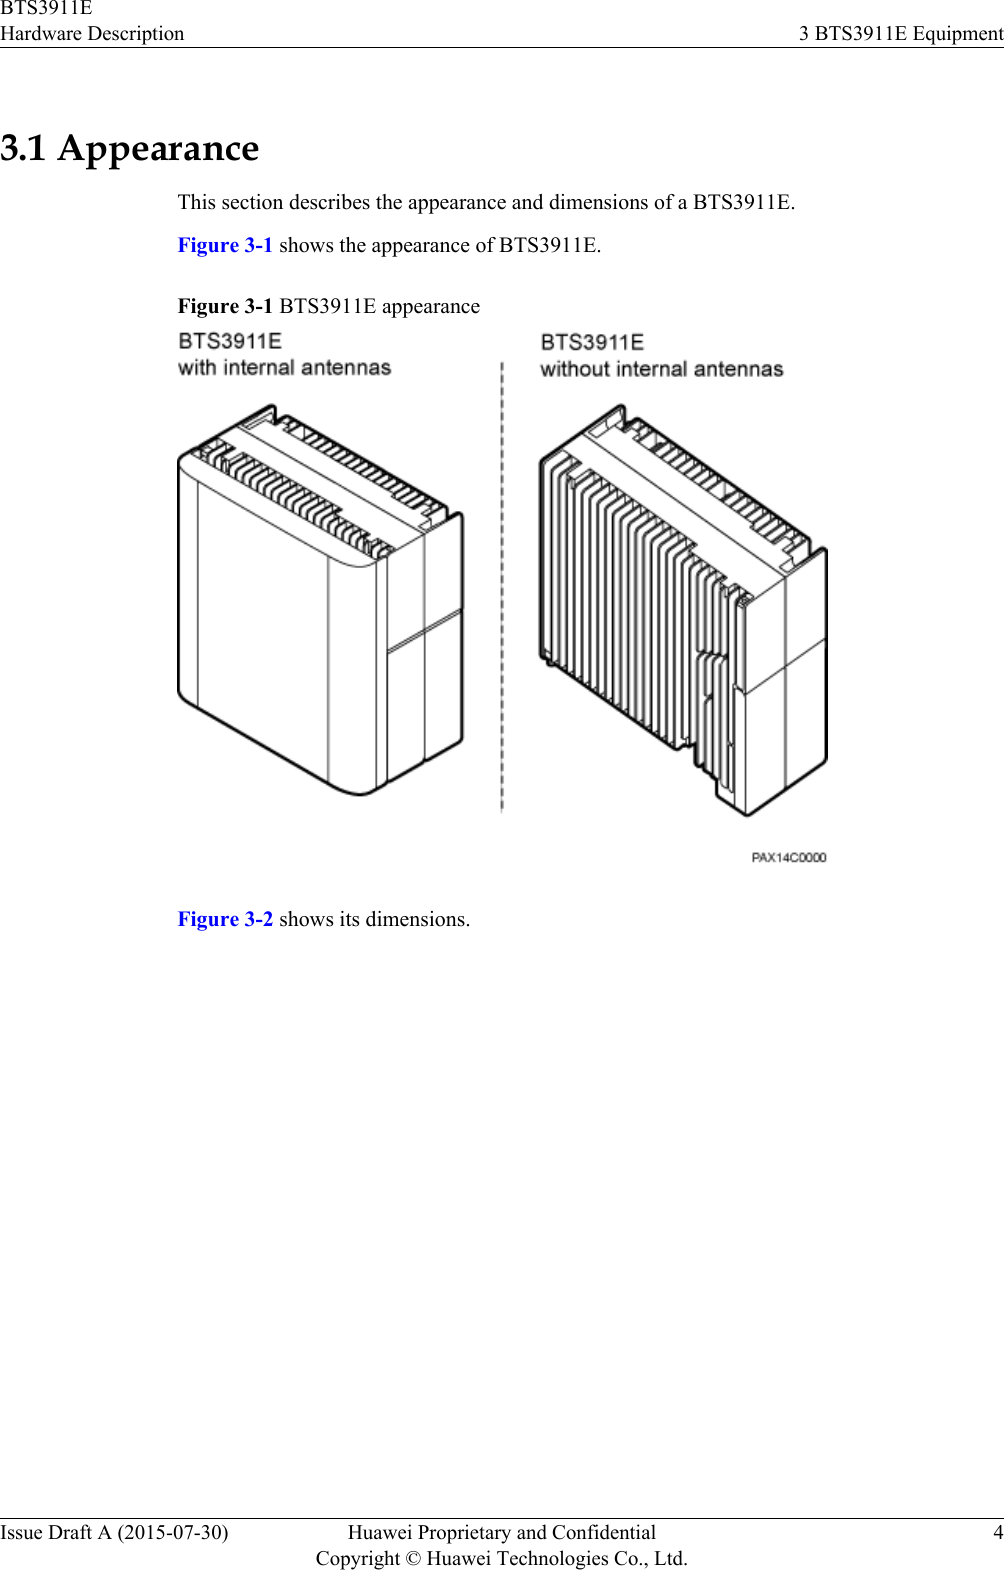 3.1 AppearanceThis section describes the appearance and dimensions of a BTS3911E.Figure 3-1 shows the appearance of BTS3911E.Figure 3-1 BTS3911E appearanceFigure 3-2 shows its dimensions.BTS3911EHardware Description 3 BTS3911E EquipmentIssue Draft A (2015-07-30) Huawei Proprietary and ConfidentialCopyright © Huawei Technologies Co., Ltd.4